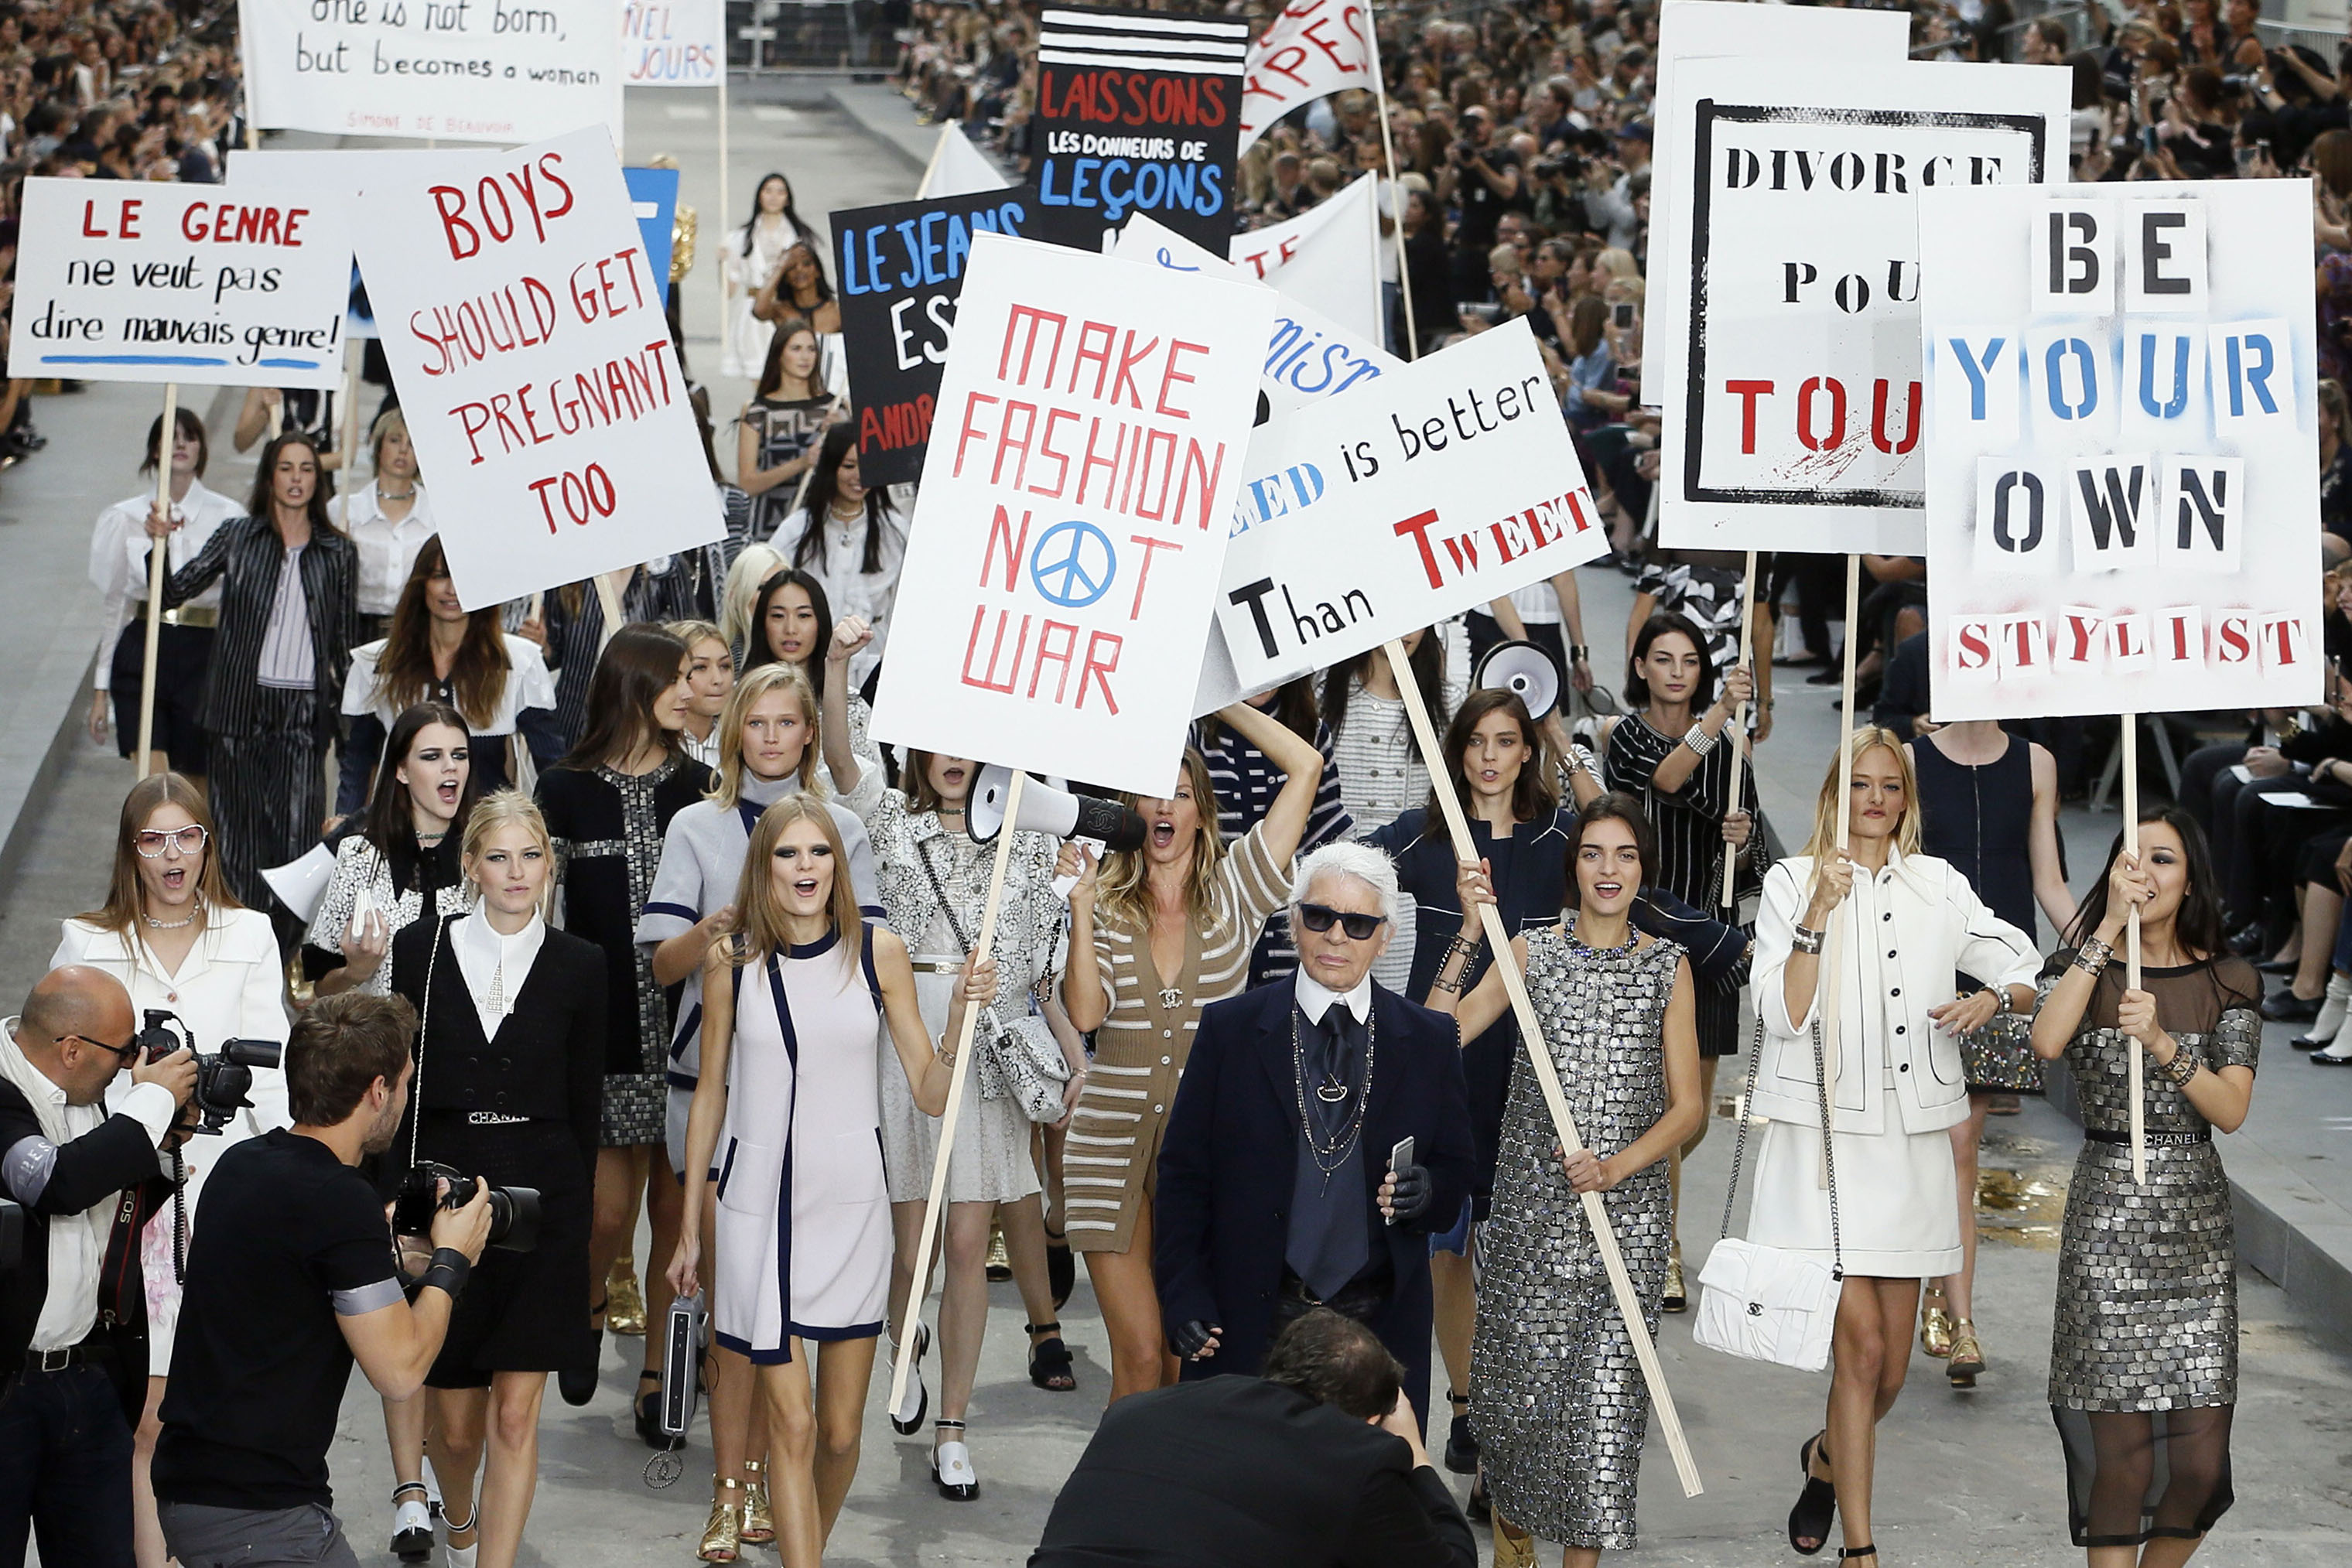 German fashion designer Karl Lagerfeld (C) acknowledges the public as Brazilian model Gisele Bundchen (back-C) speaks through a megaphone as she and other models fake a demonstration as they present creations for Chanel's 2015 Spring/Summer fashion show, on Sept. 30, 2014 at the Grand Palais in Paris. (Patrick Kovarik—AFP/Getty Images)